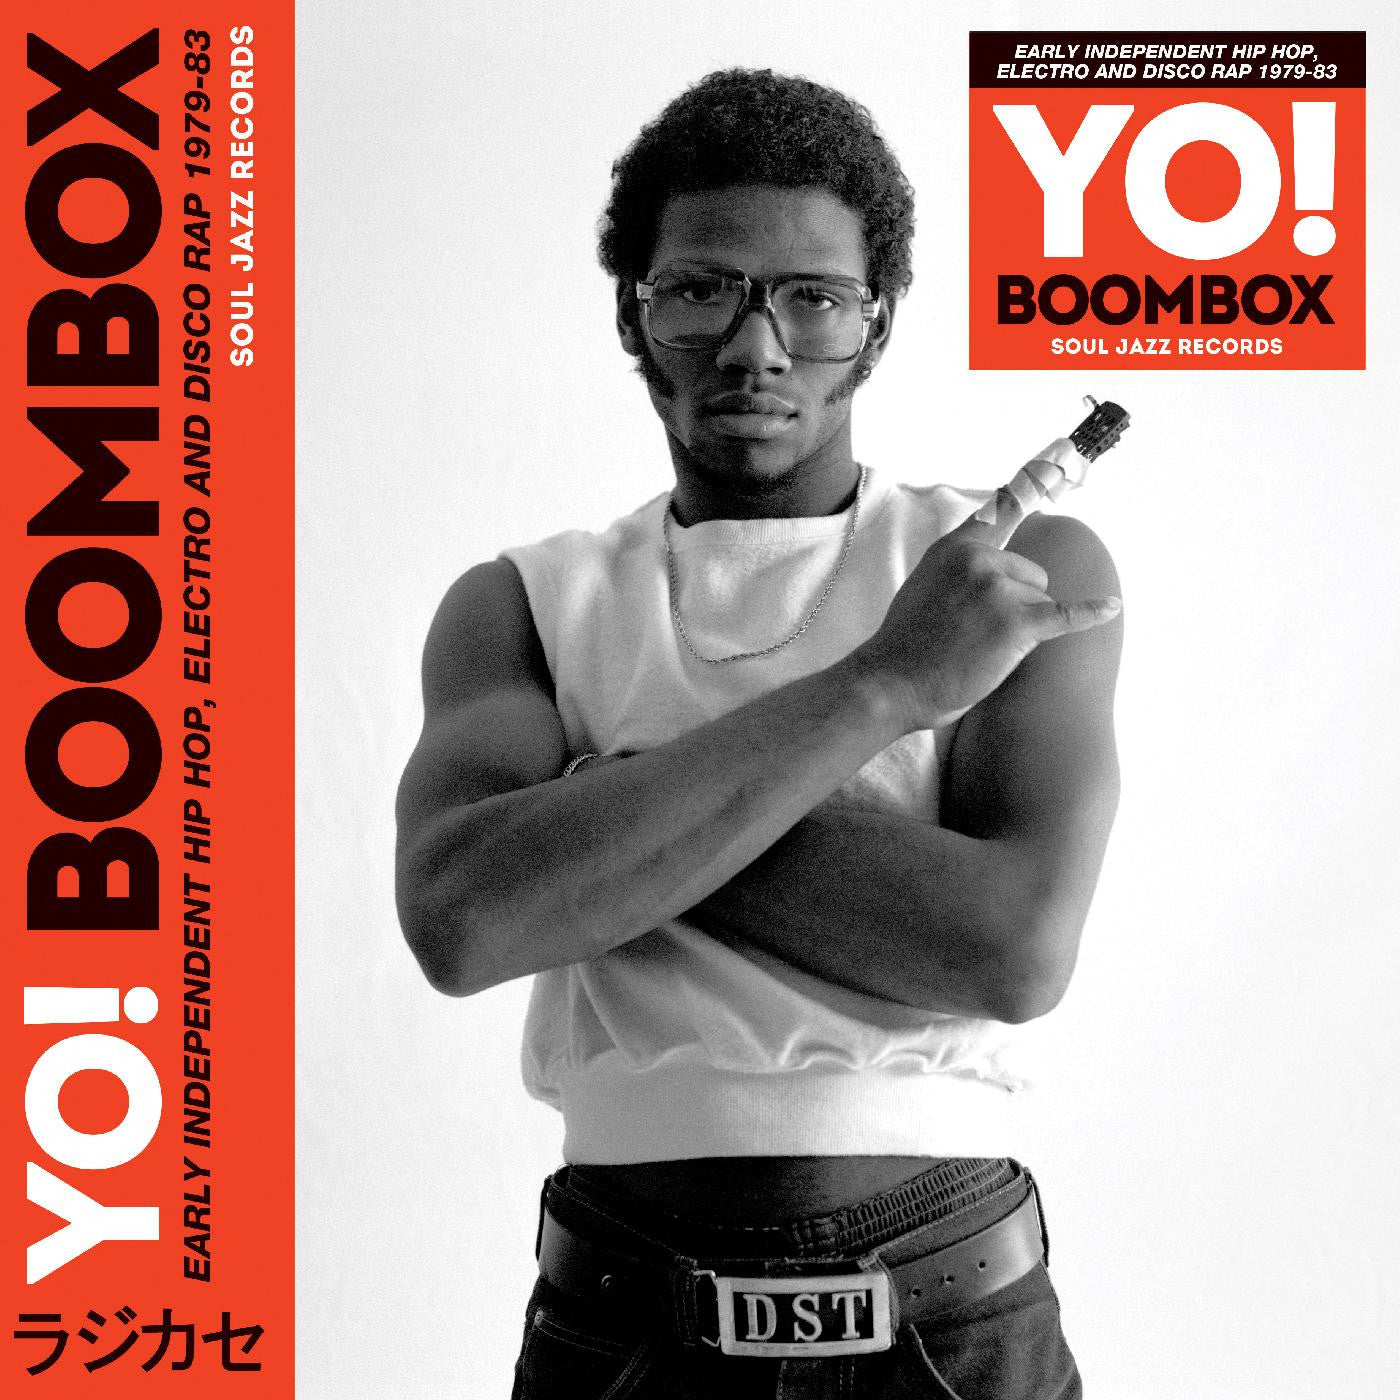 Various - Soul Jazz Records presents: YO! BOOMBOX - Early Independent Hip Hop, Electro And Disco Rap 1979-83